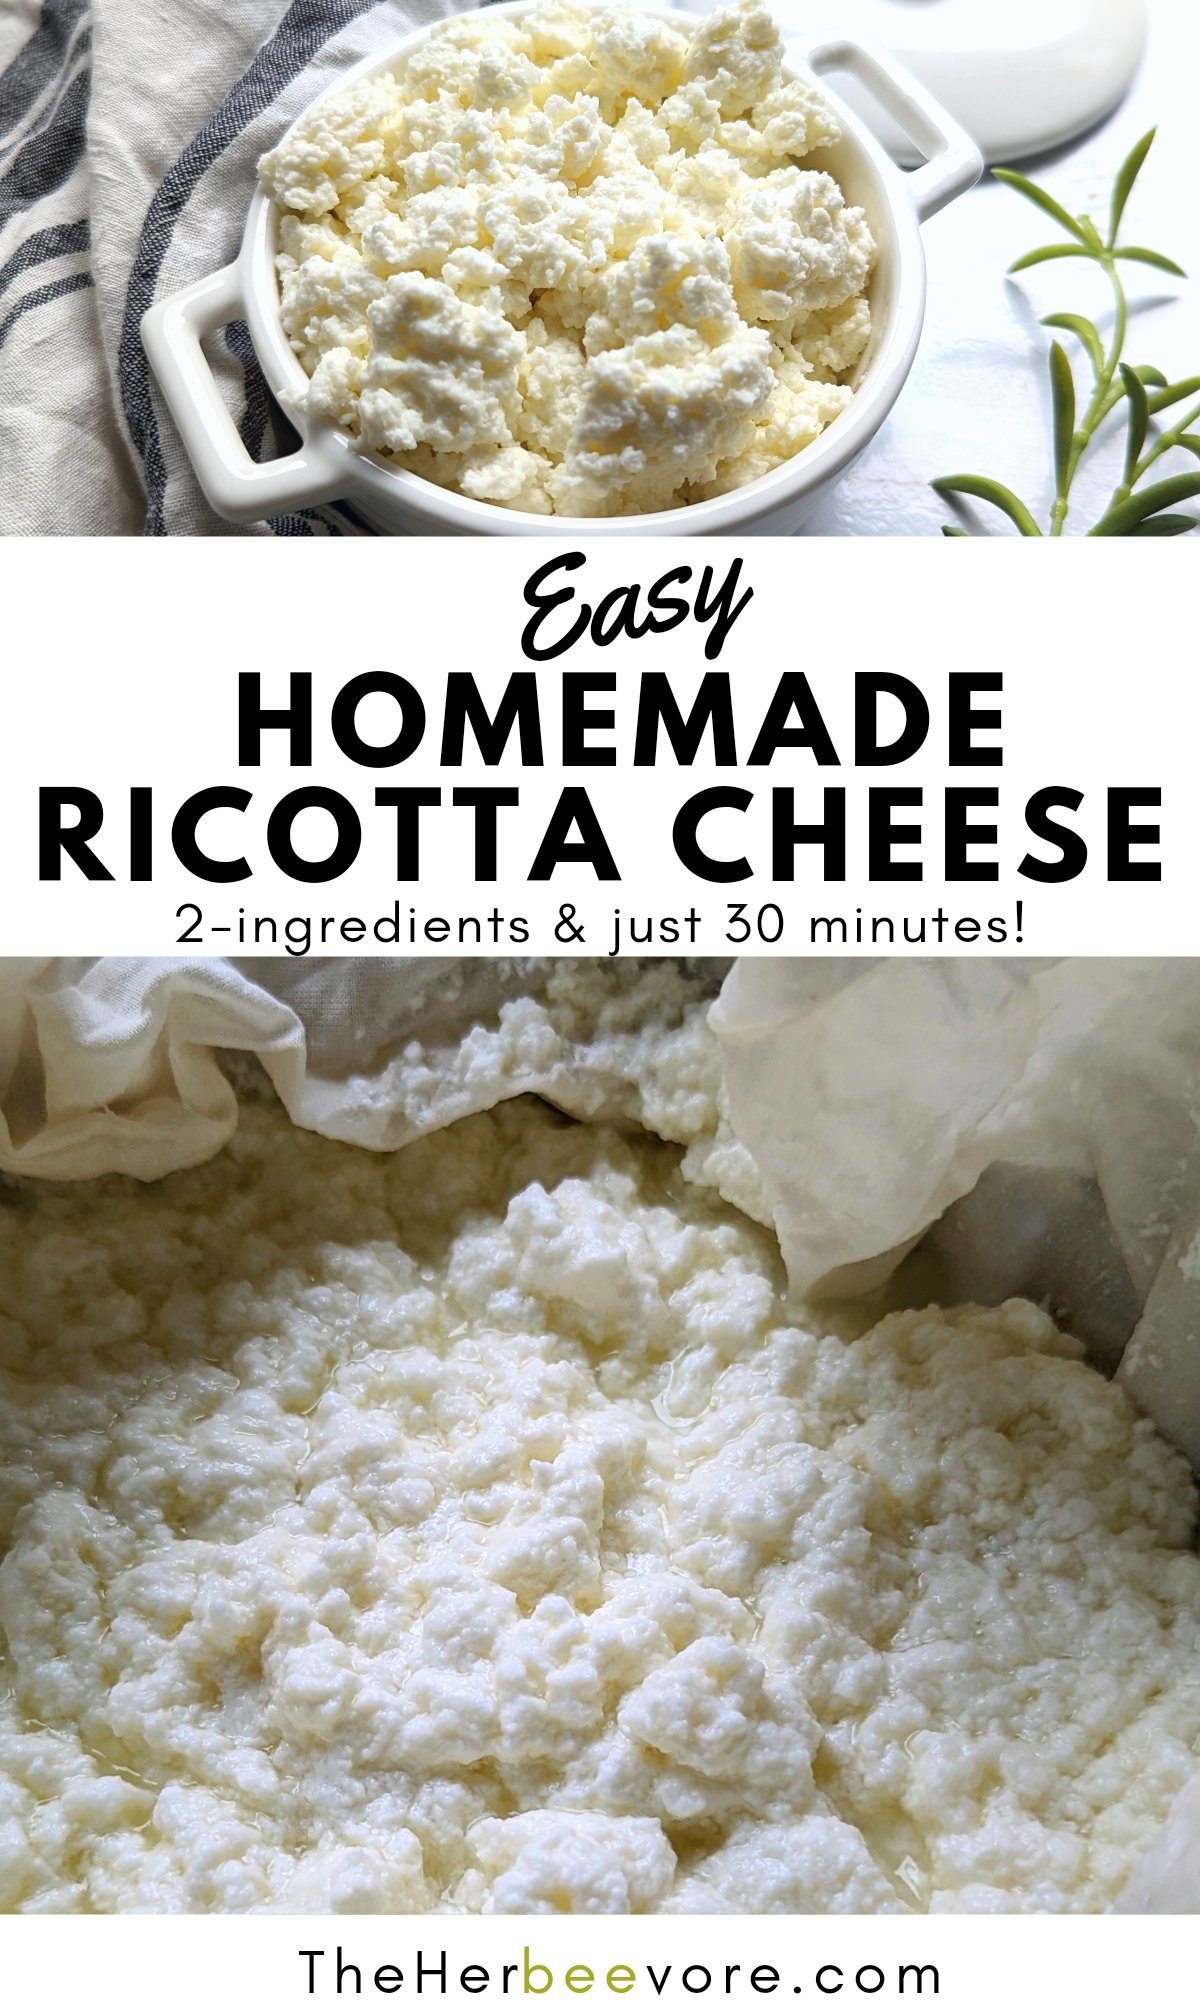 homemade ricotta cheese recipe with whole milk cheese easy homemade cheese from milk and lemon juice or vinegar